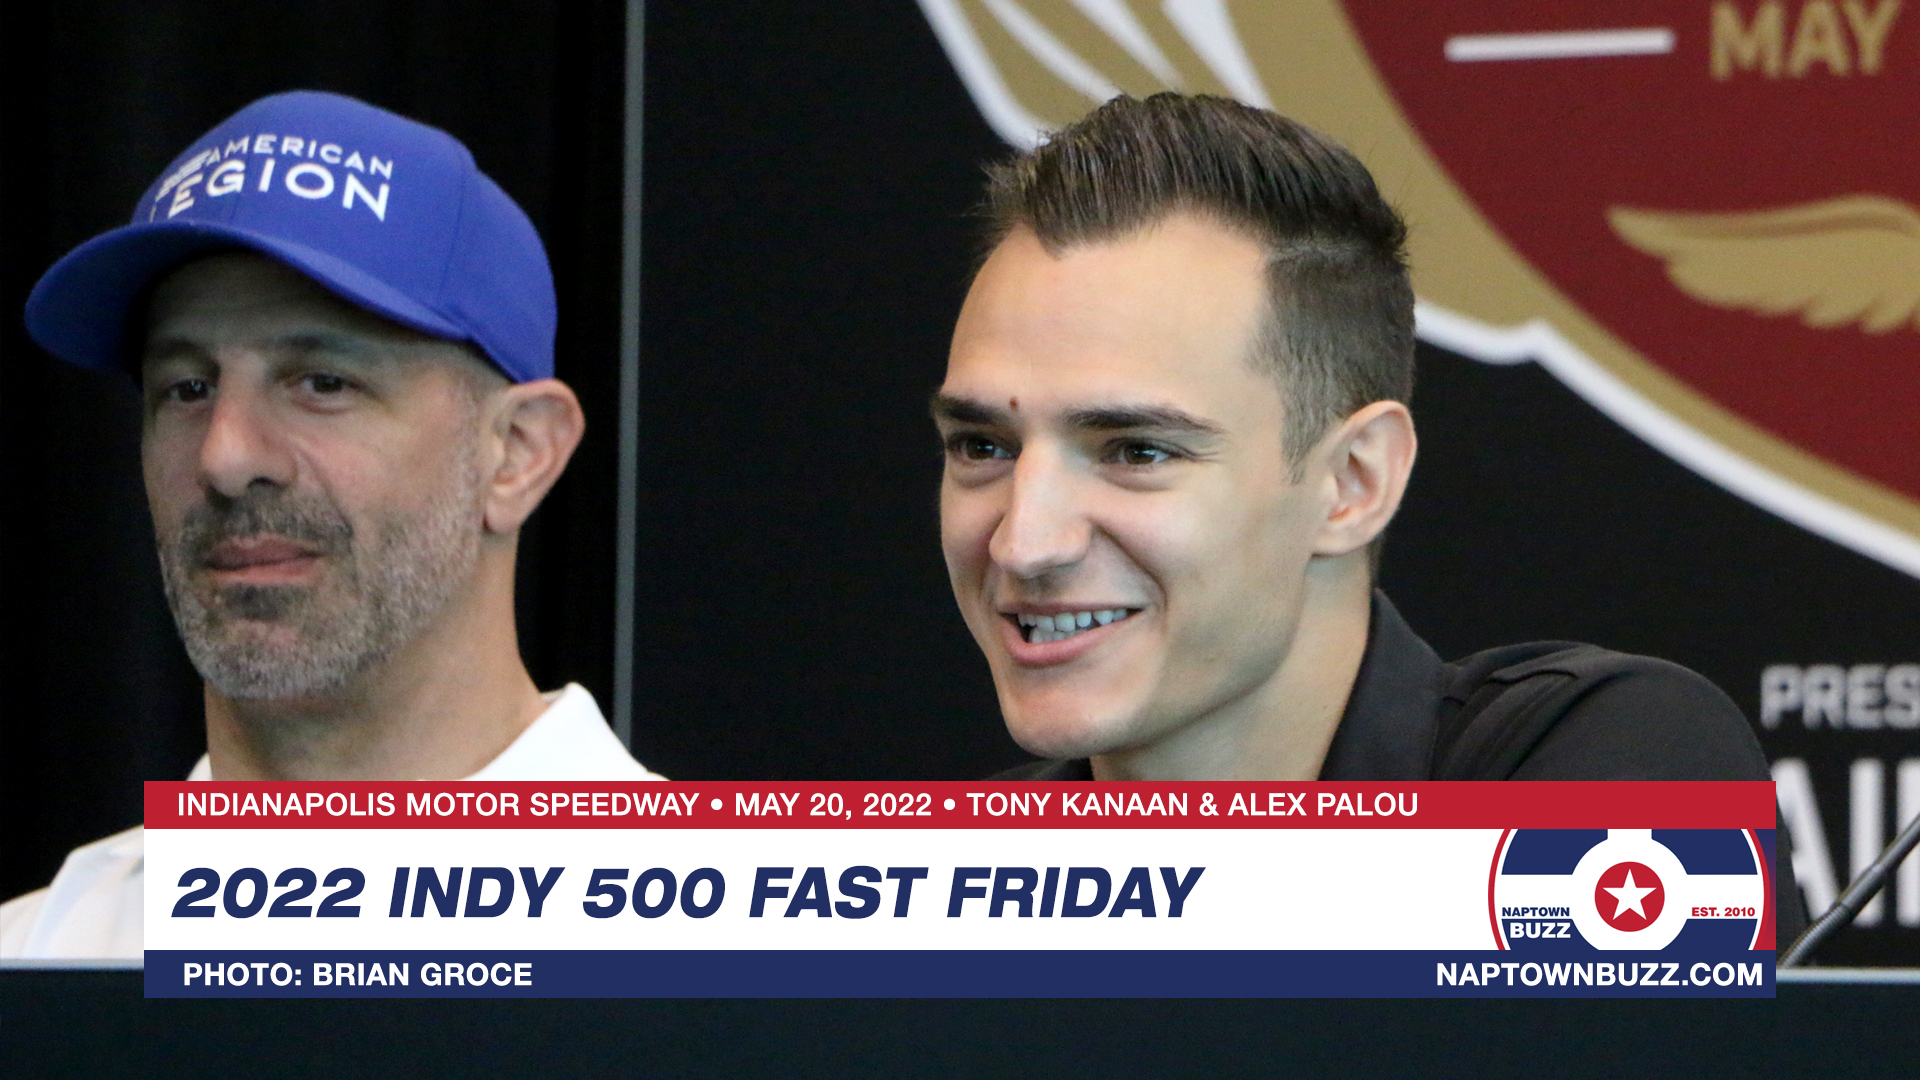 Tony Kanaan and Alex Palou on Indy 500 Fast Friday Practice at Indianapolis Motor Speedway on May 20, 2022